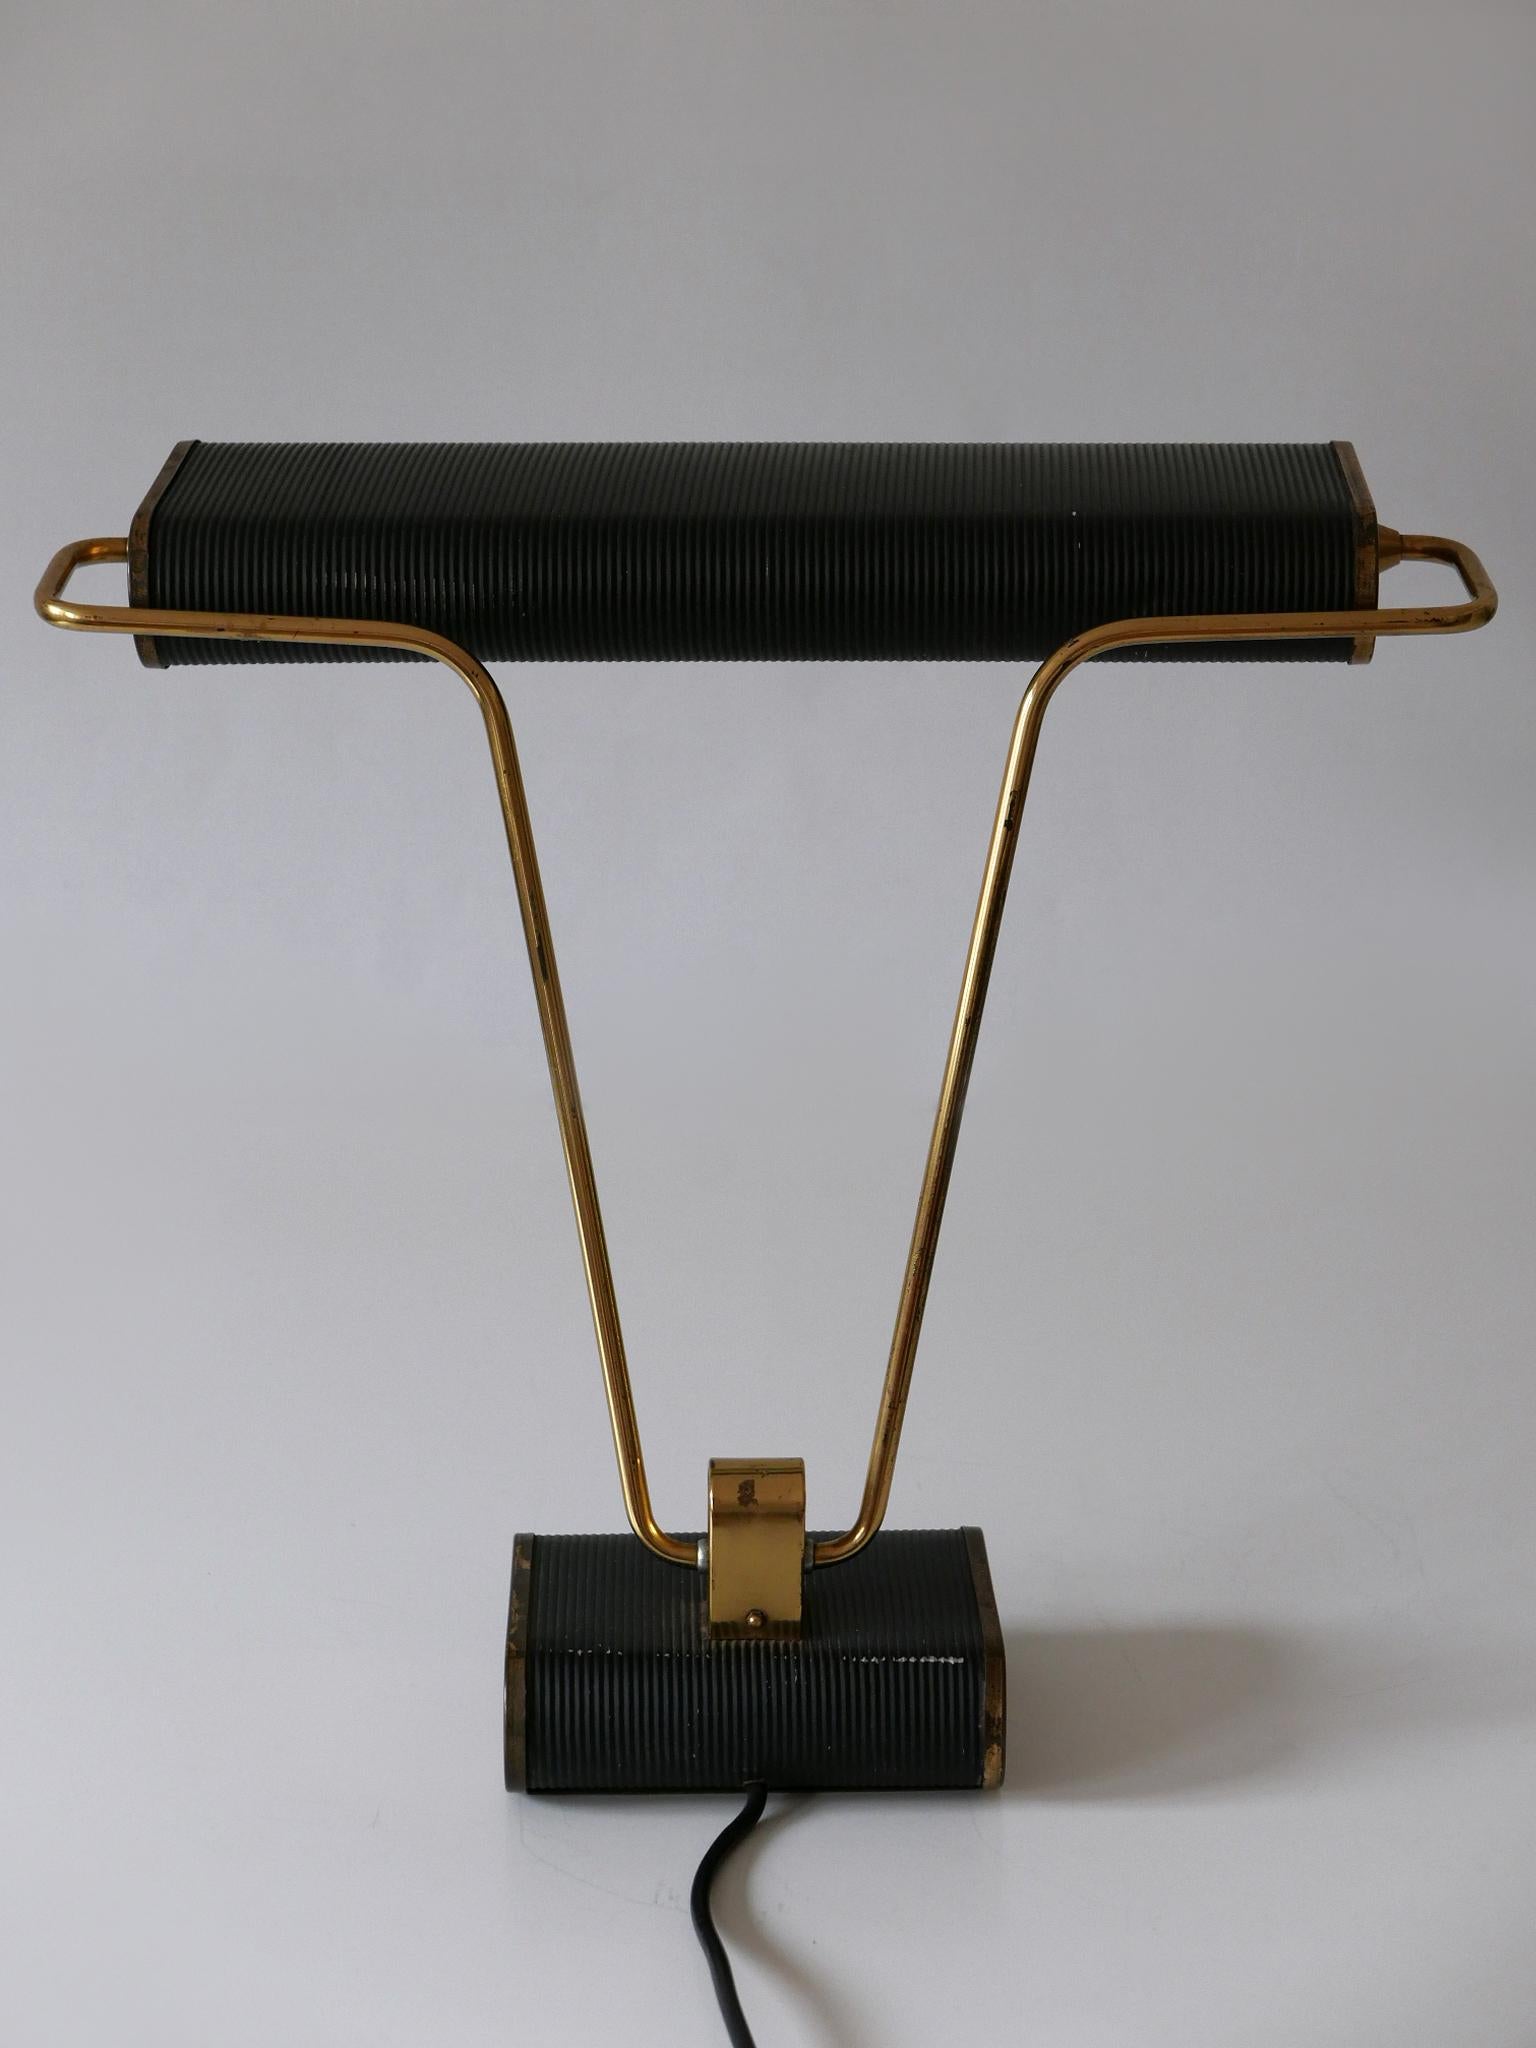 Art Deco Table Lamp or Desk Light 'No 71' by André Mounique for Jumo 1930s For Sale 8